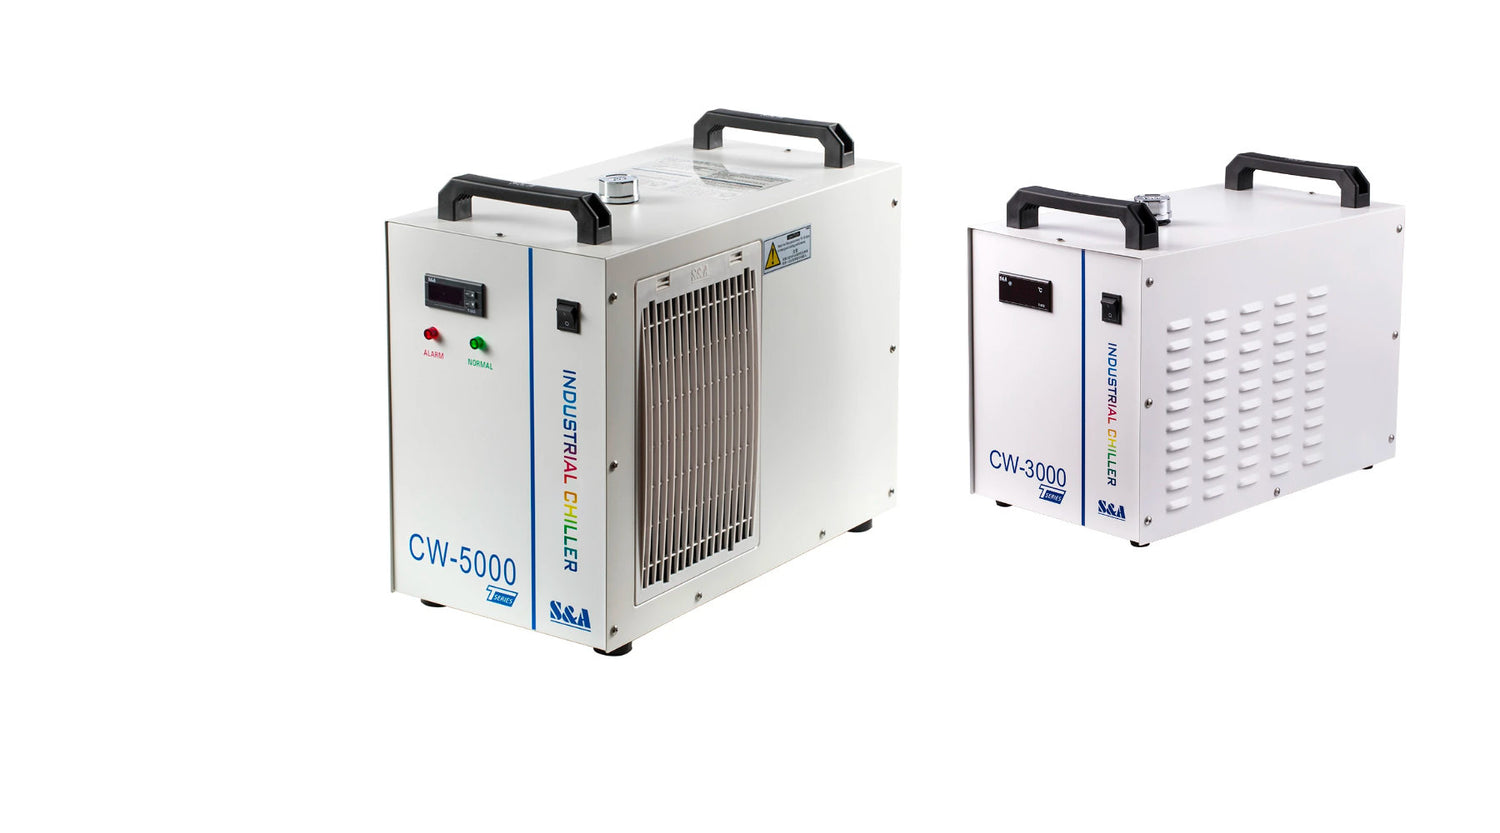 S&A Chillers UK